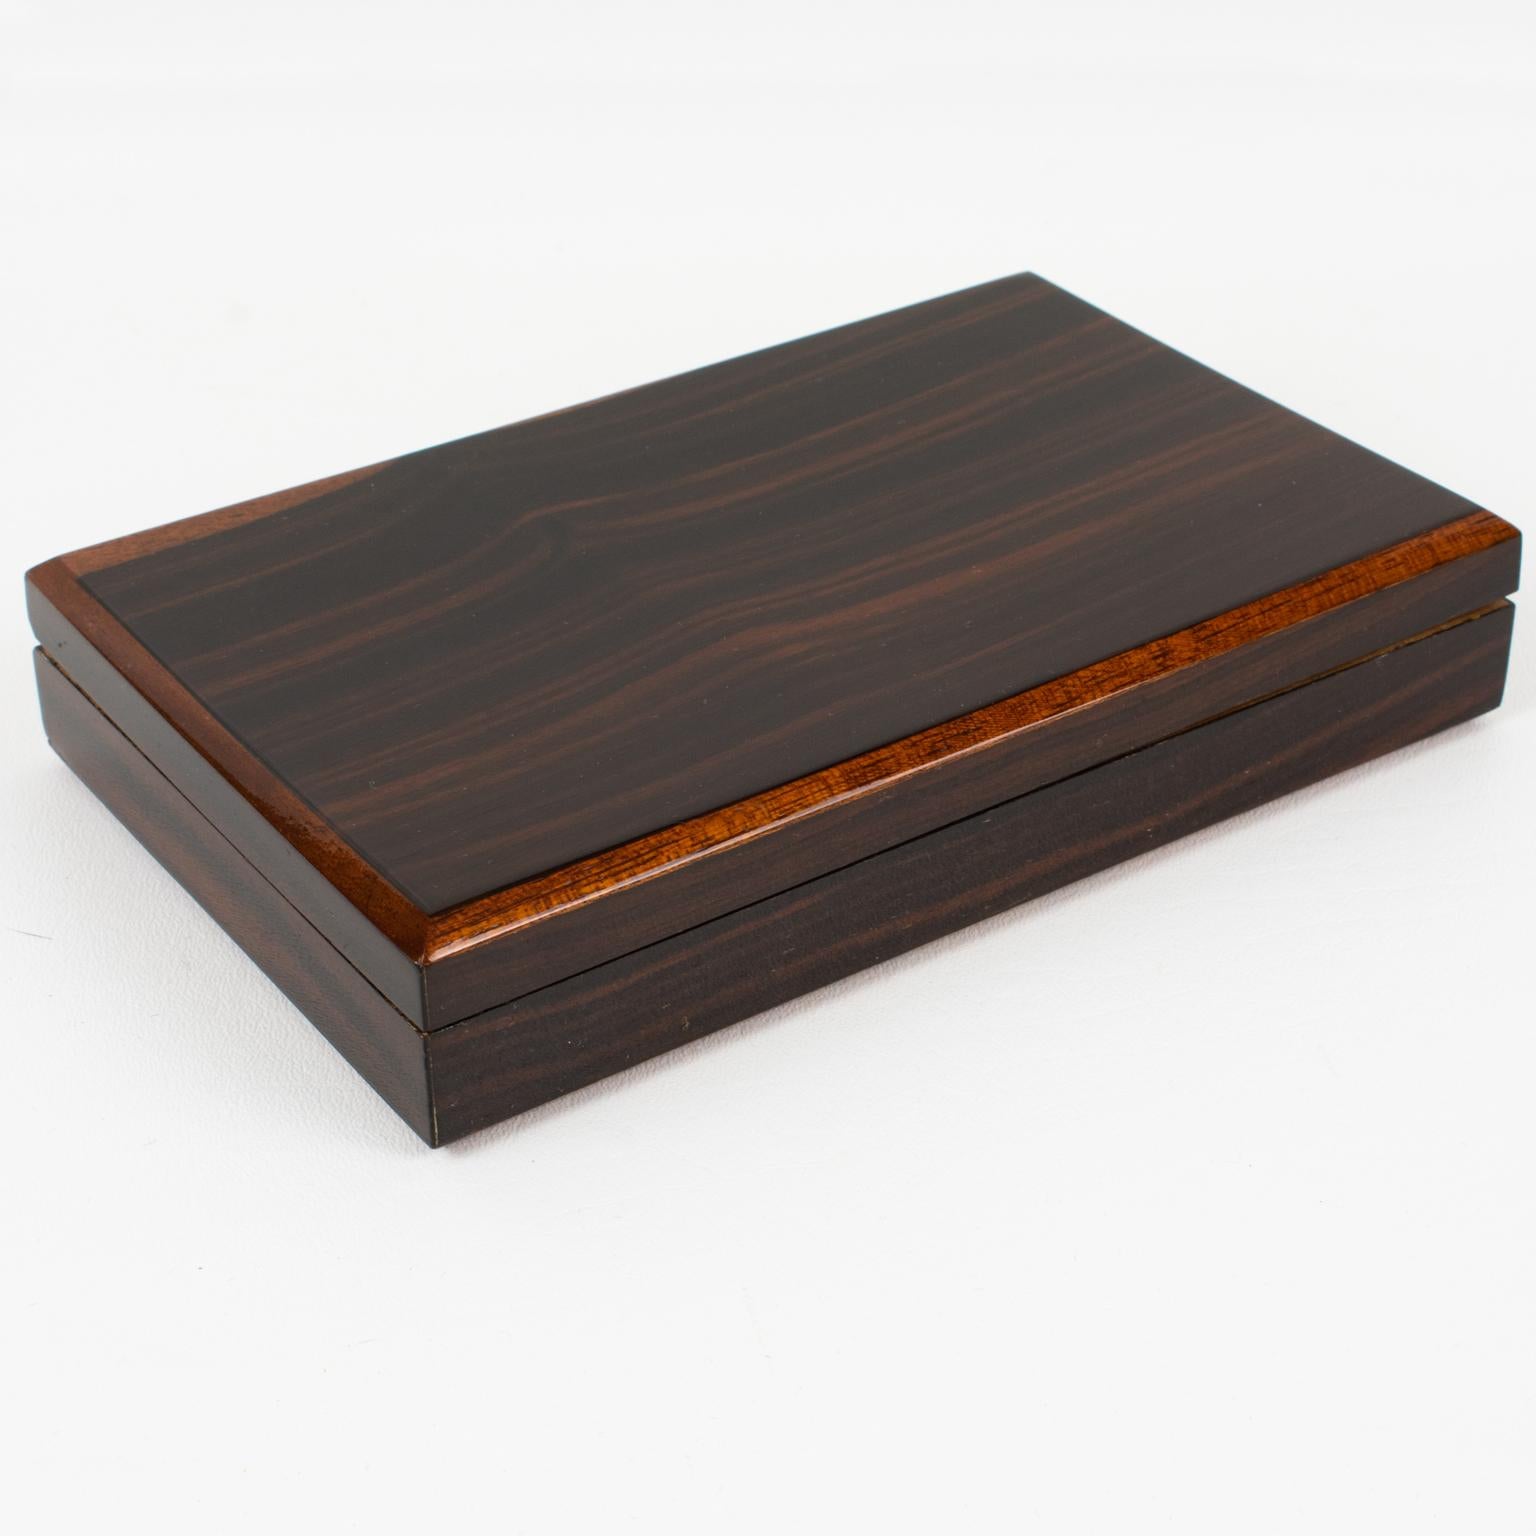 This elegant French Art Deco modernist decorative lidded box boasts a minimalist yet refined and sophisticated shape with varnish Macassar wood ornate with tropical wooden edging trims. The interior of the object is adorned with tropical wood